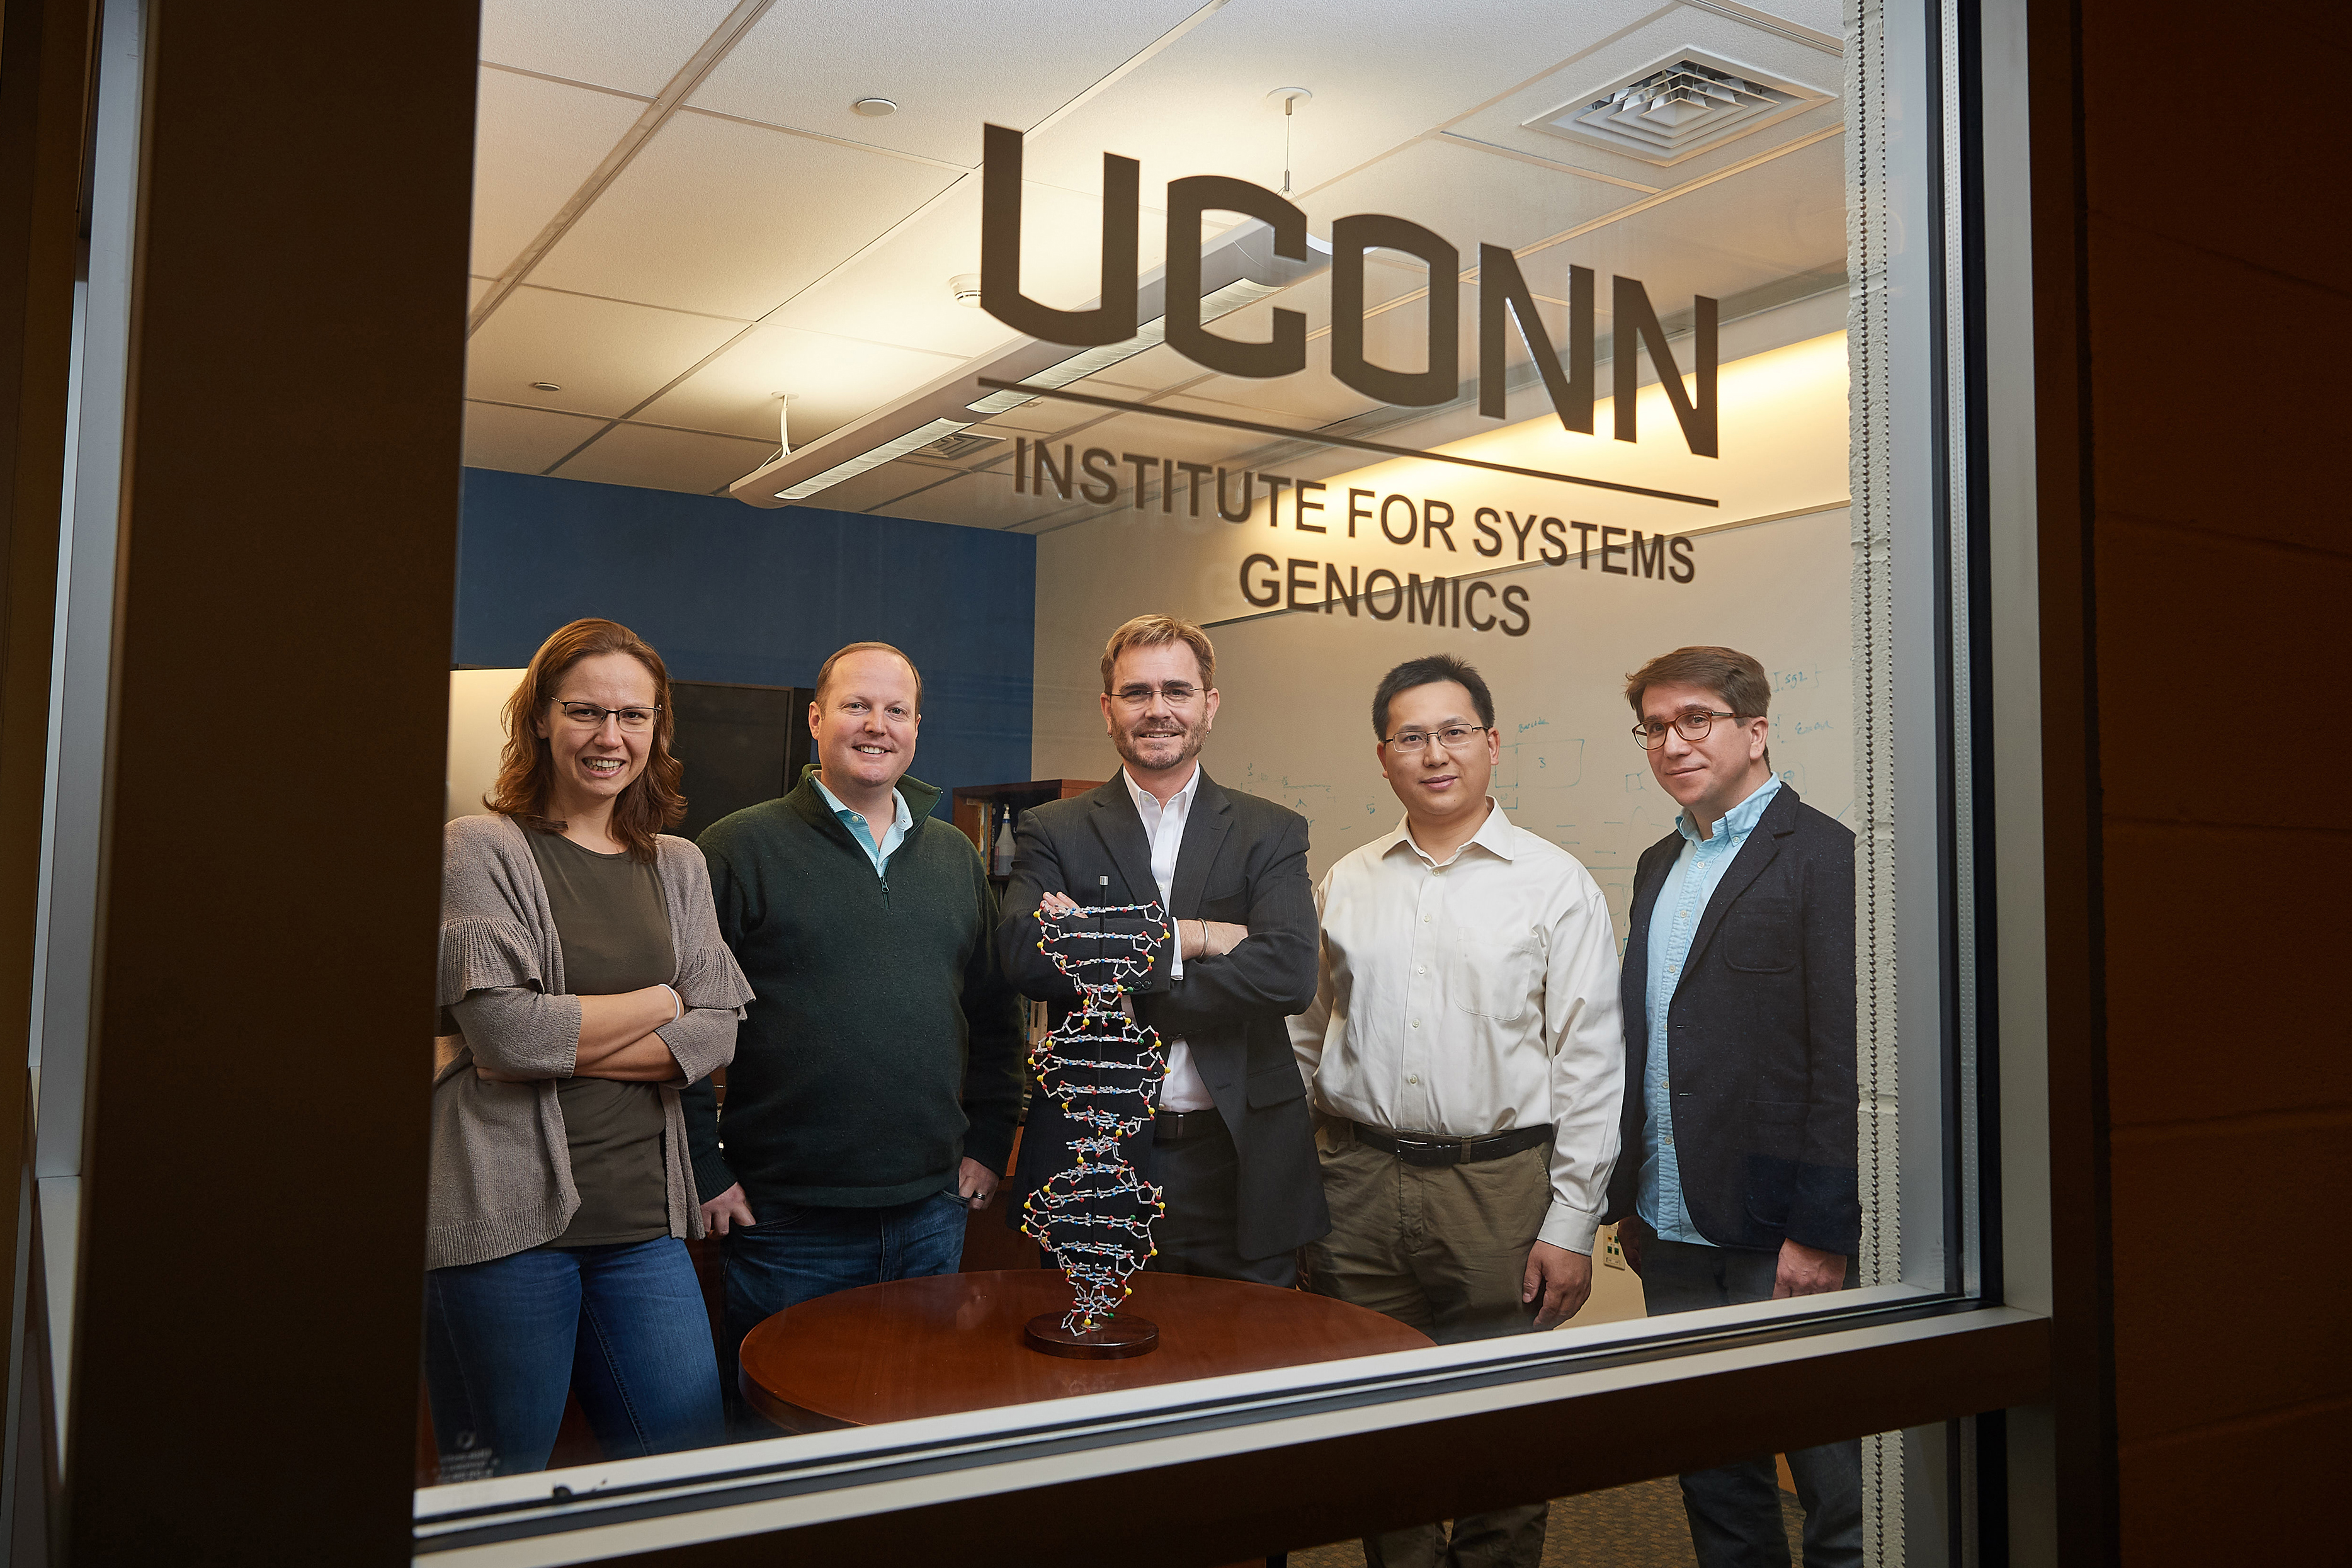 Five UConn Health researchers have won a new type of NIH grant designed to foster innovation and risk-taking in basic medical research. From left, Duygu Ucar, Justin Cotney, Brenton Graveley, Zhengqing Oyang, and Stefan Pinter, at the Cell and Genome Sciences Building in Farmington. (Peter Morenus/UConn Photo)